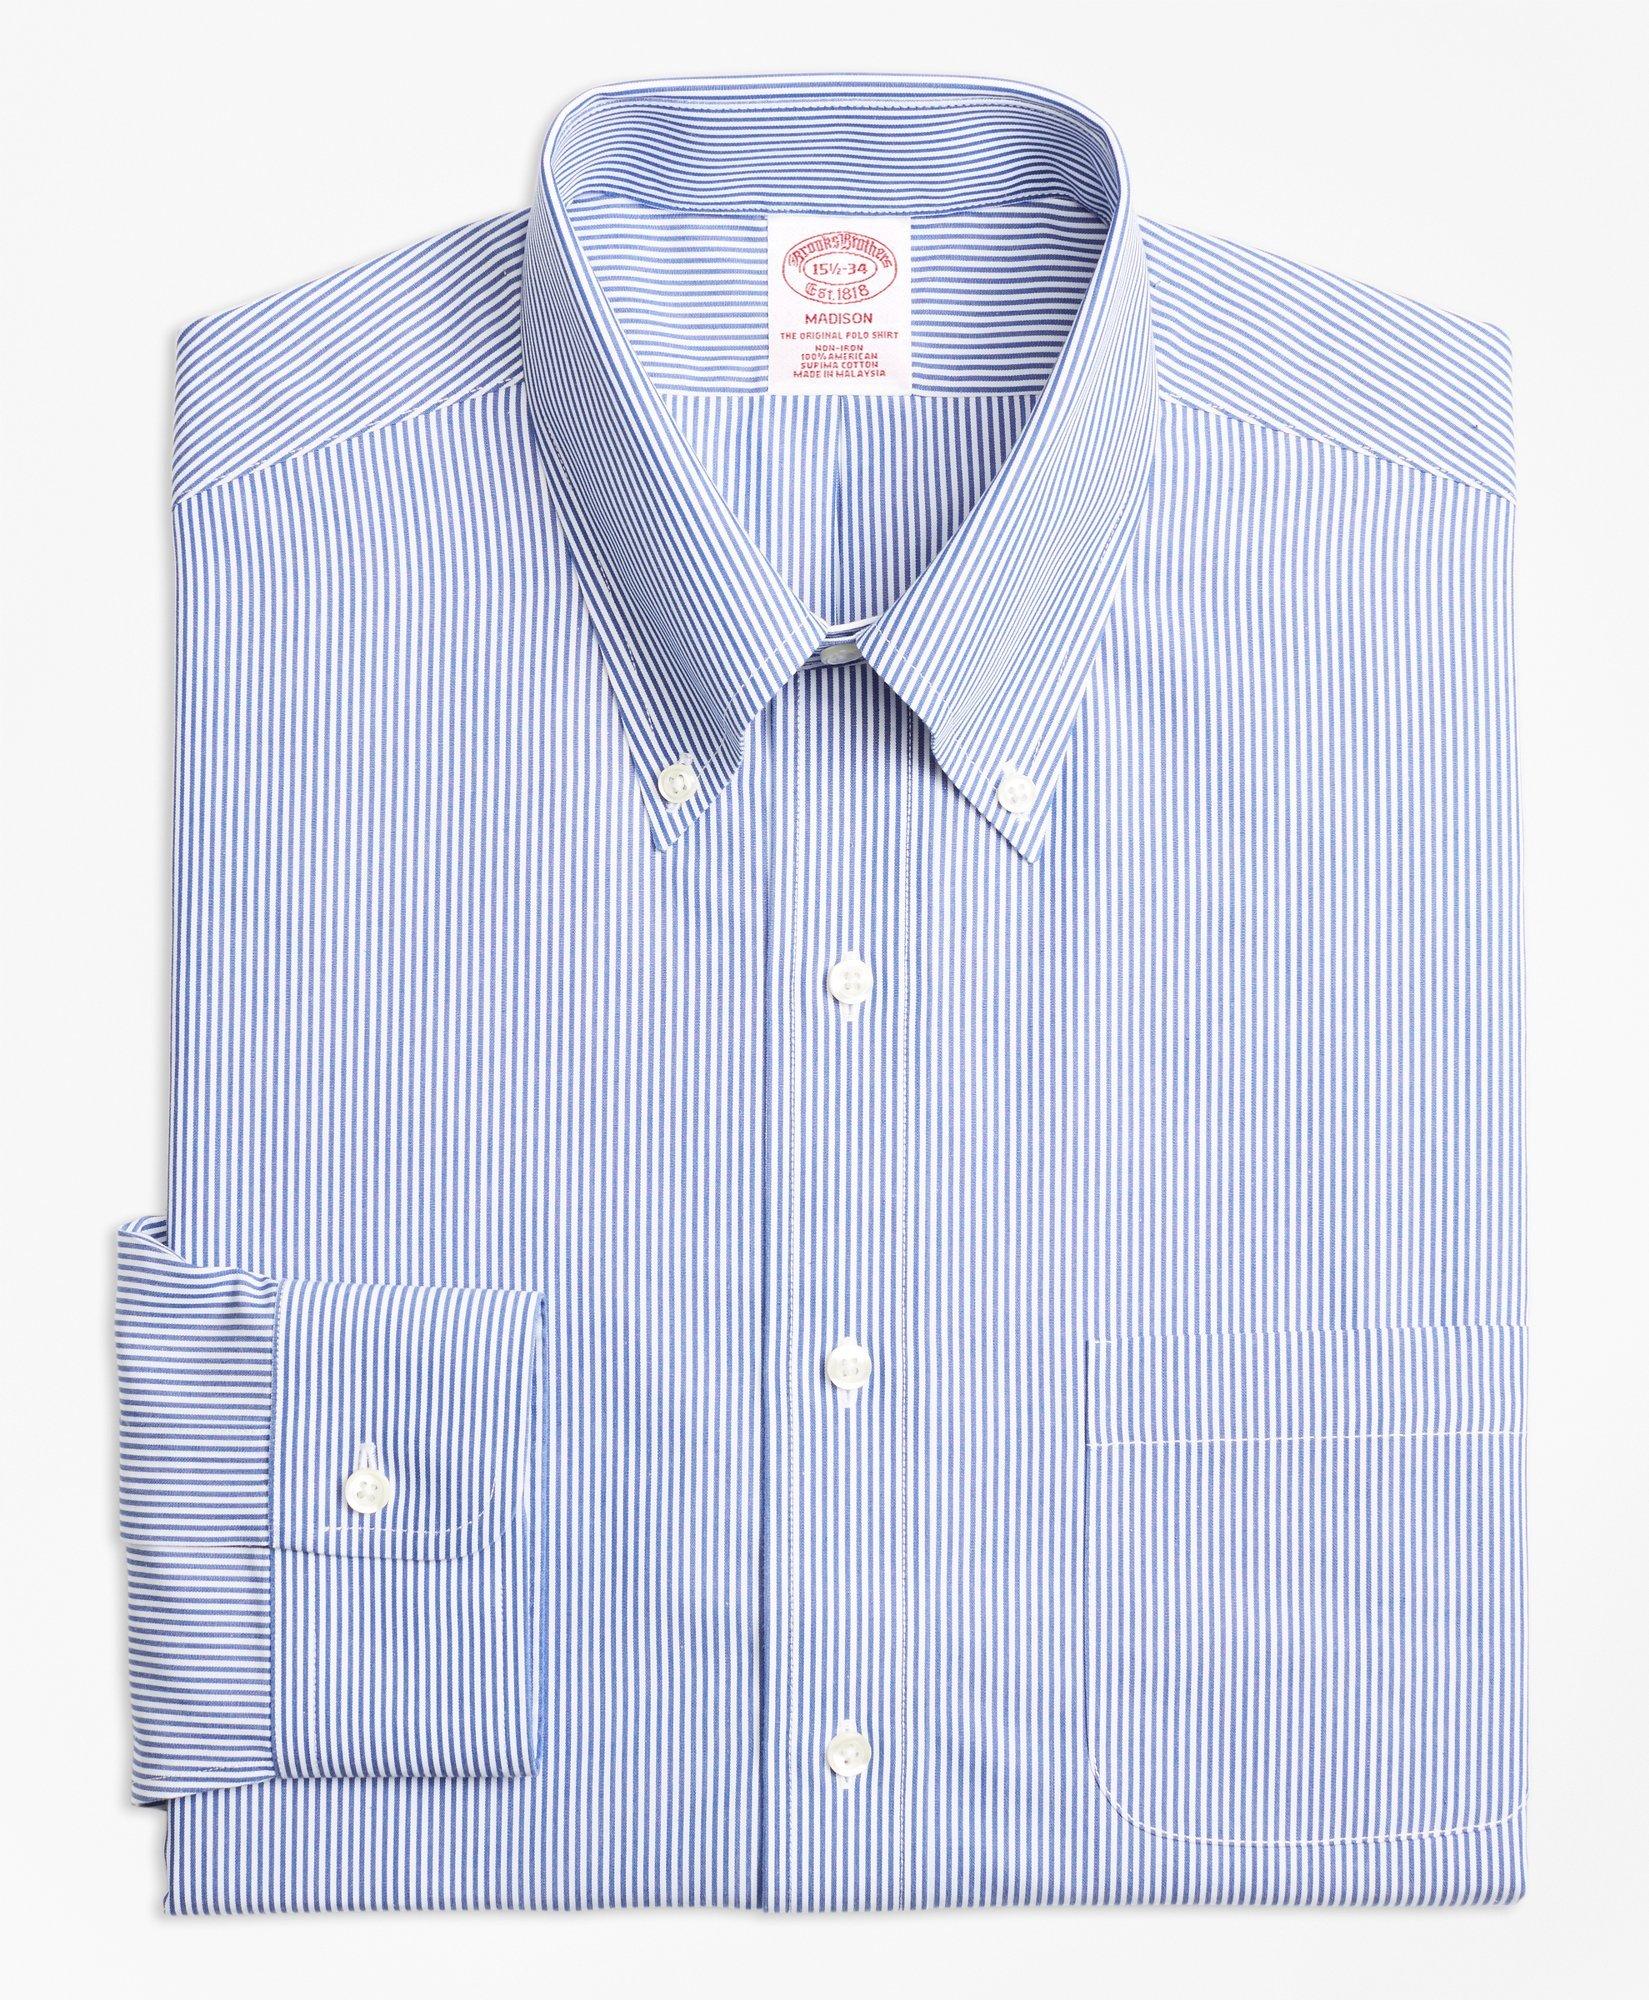 Madison Relaxed-Fit Dress Shirt, Non-Iron Candy Stripe